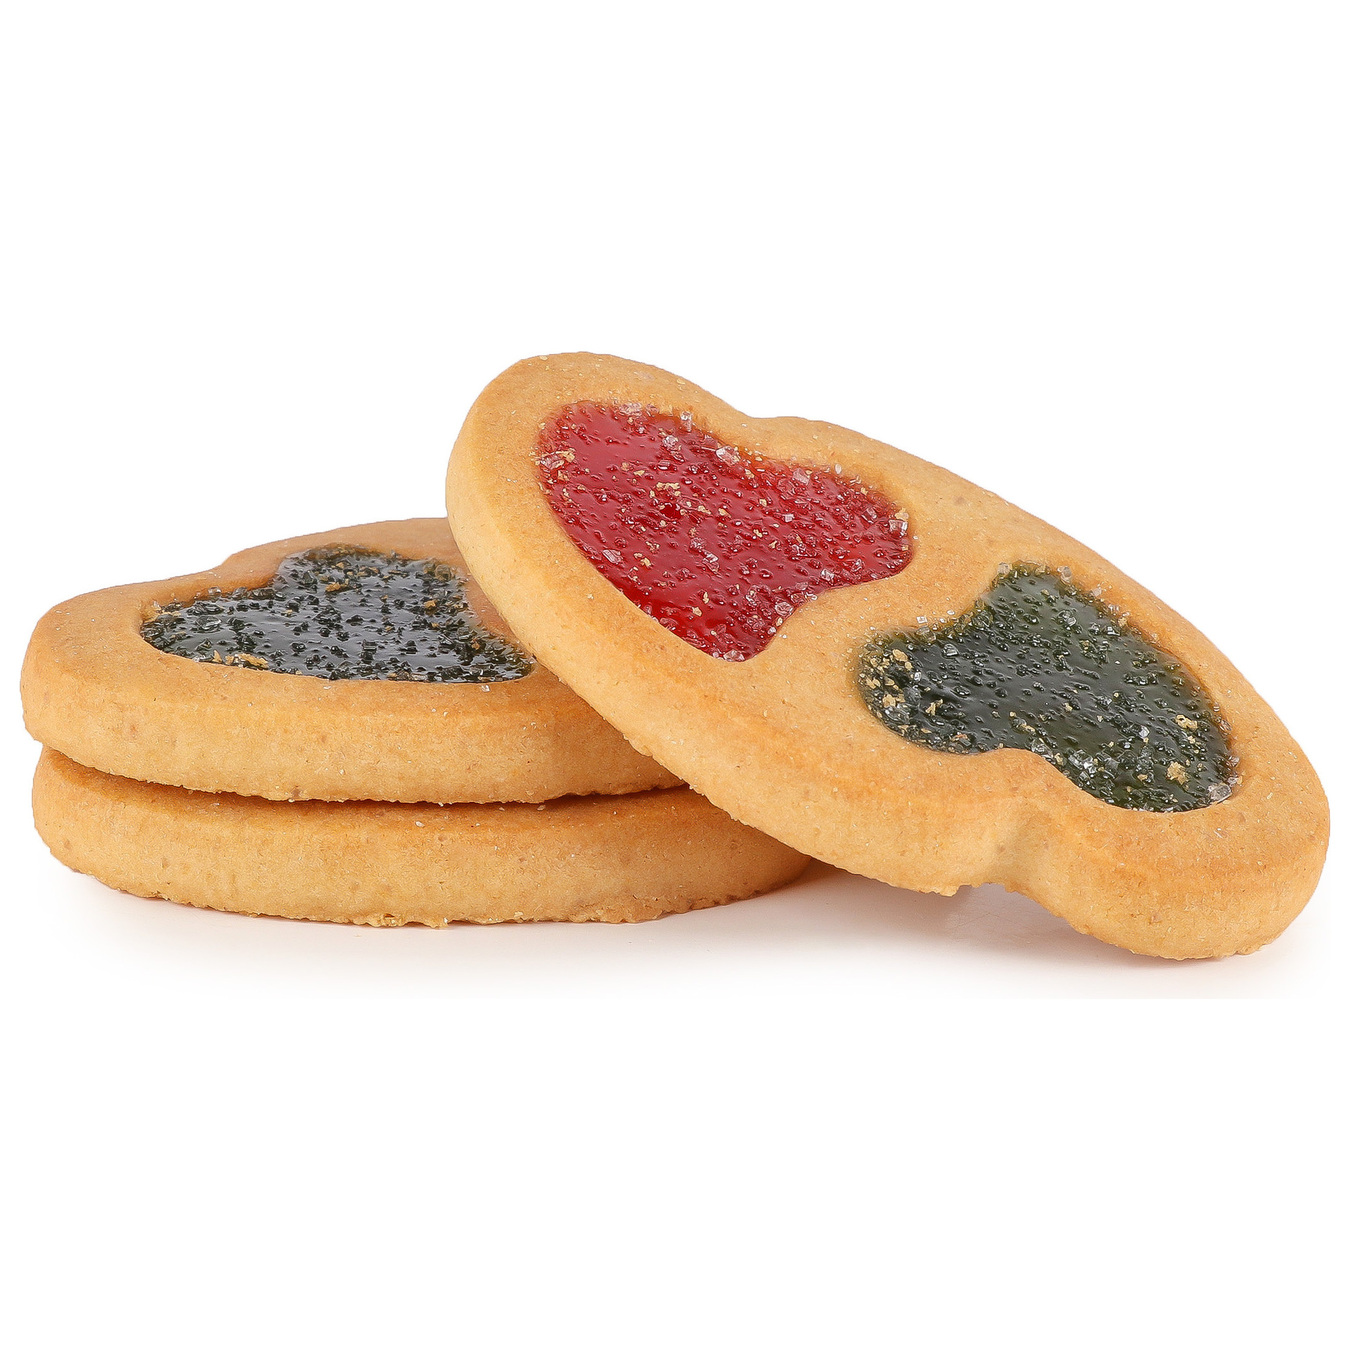 Delicia cookies with strawberry and cactus flavor, 400g 2